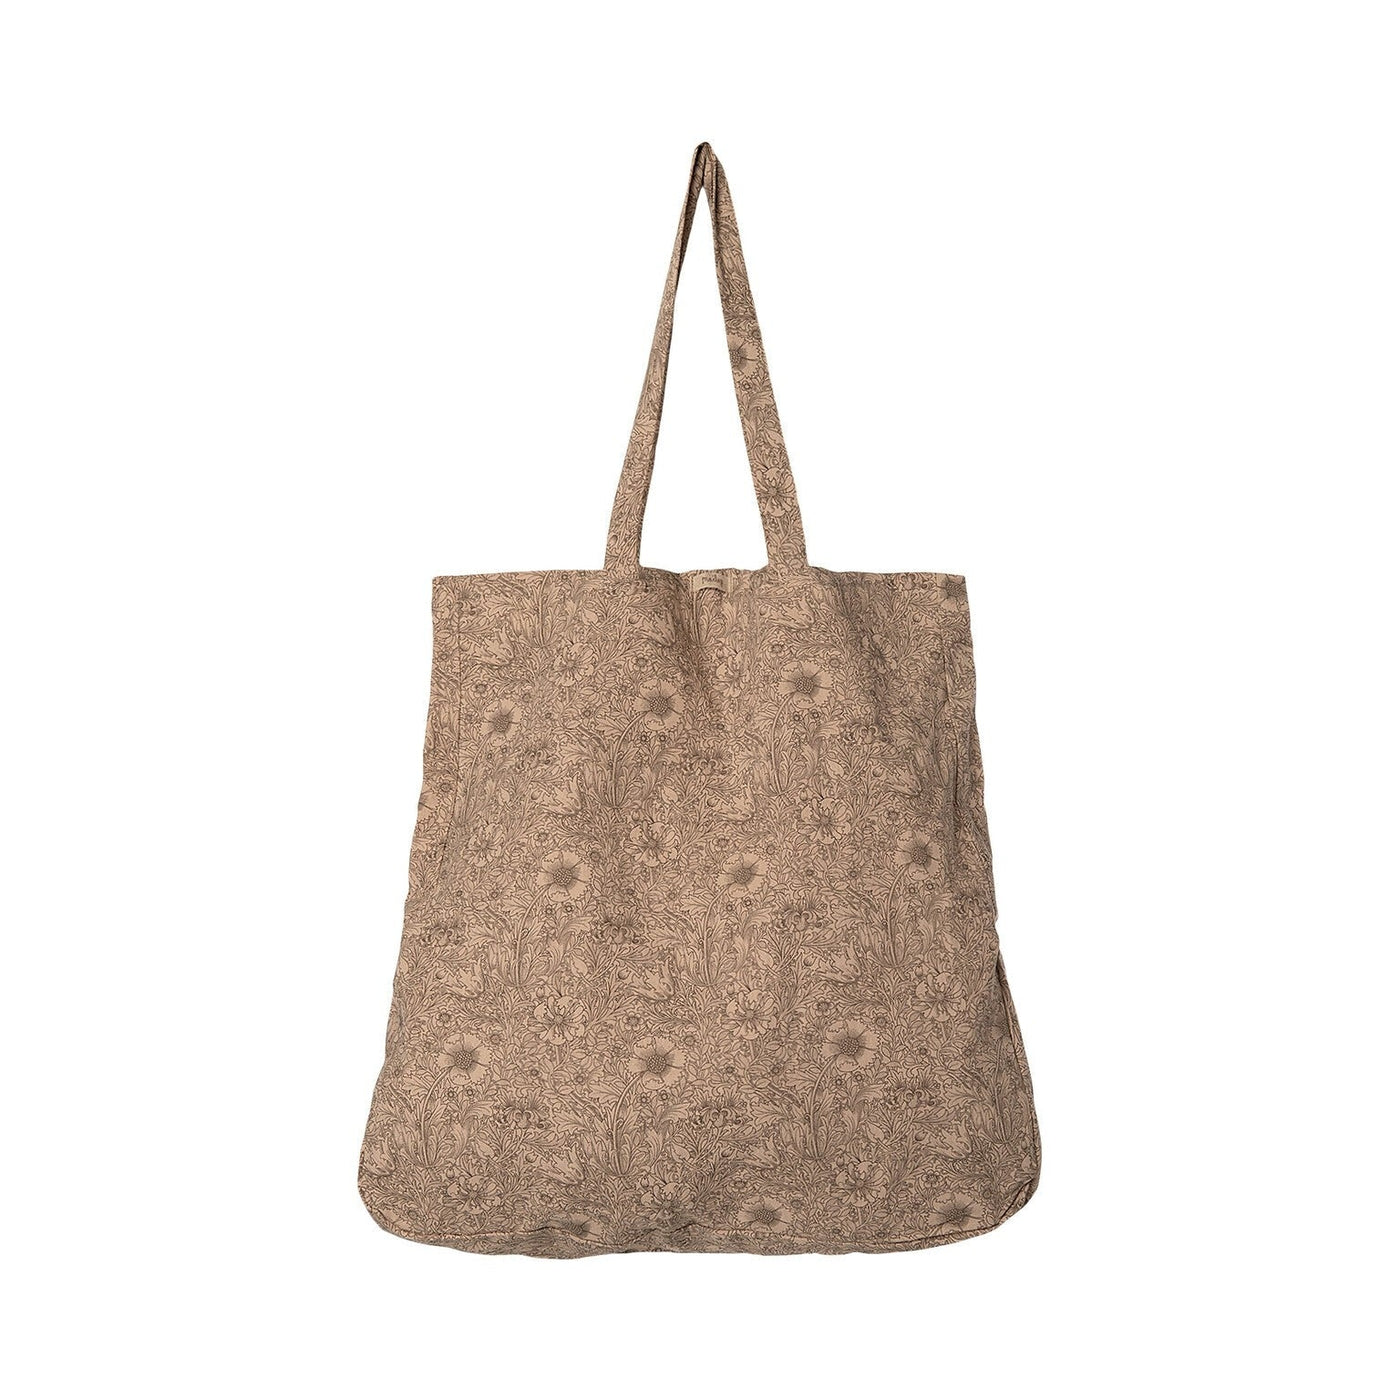 Adult's Large Tote Bag - Flowers